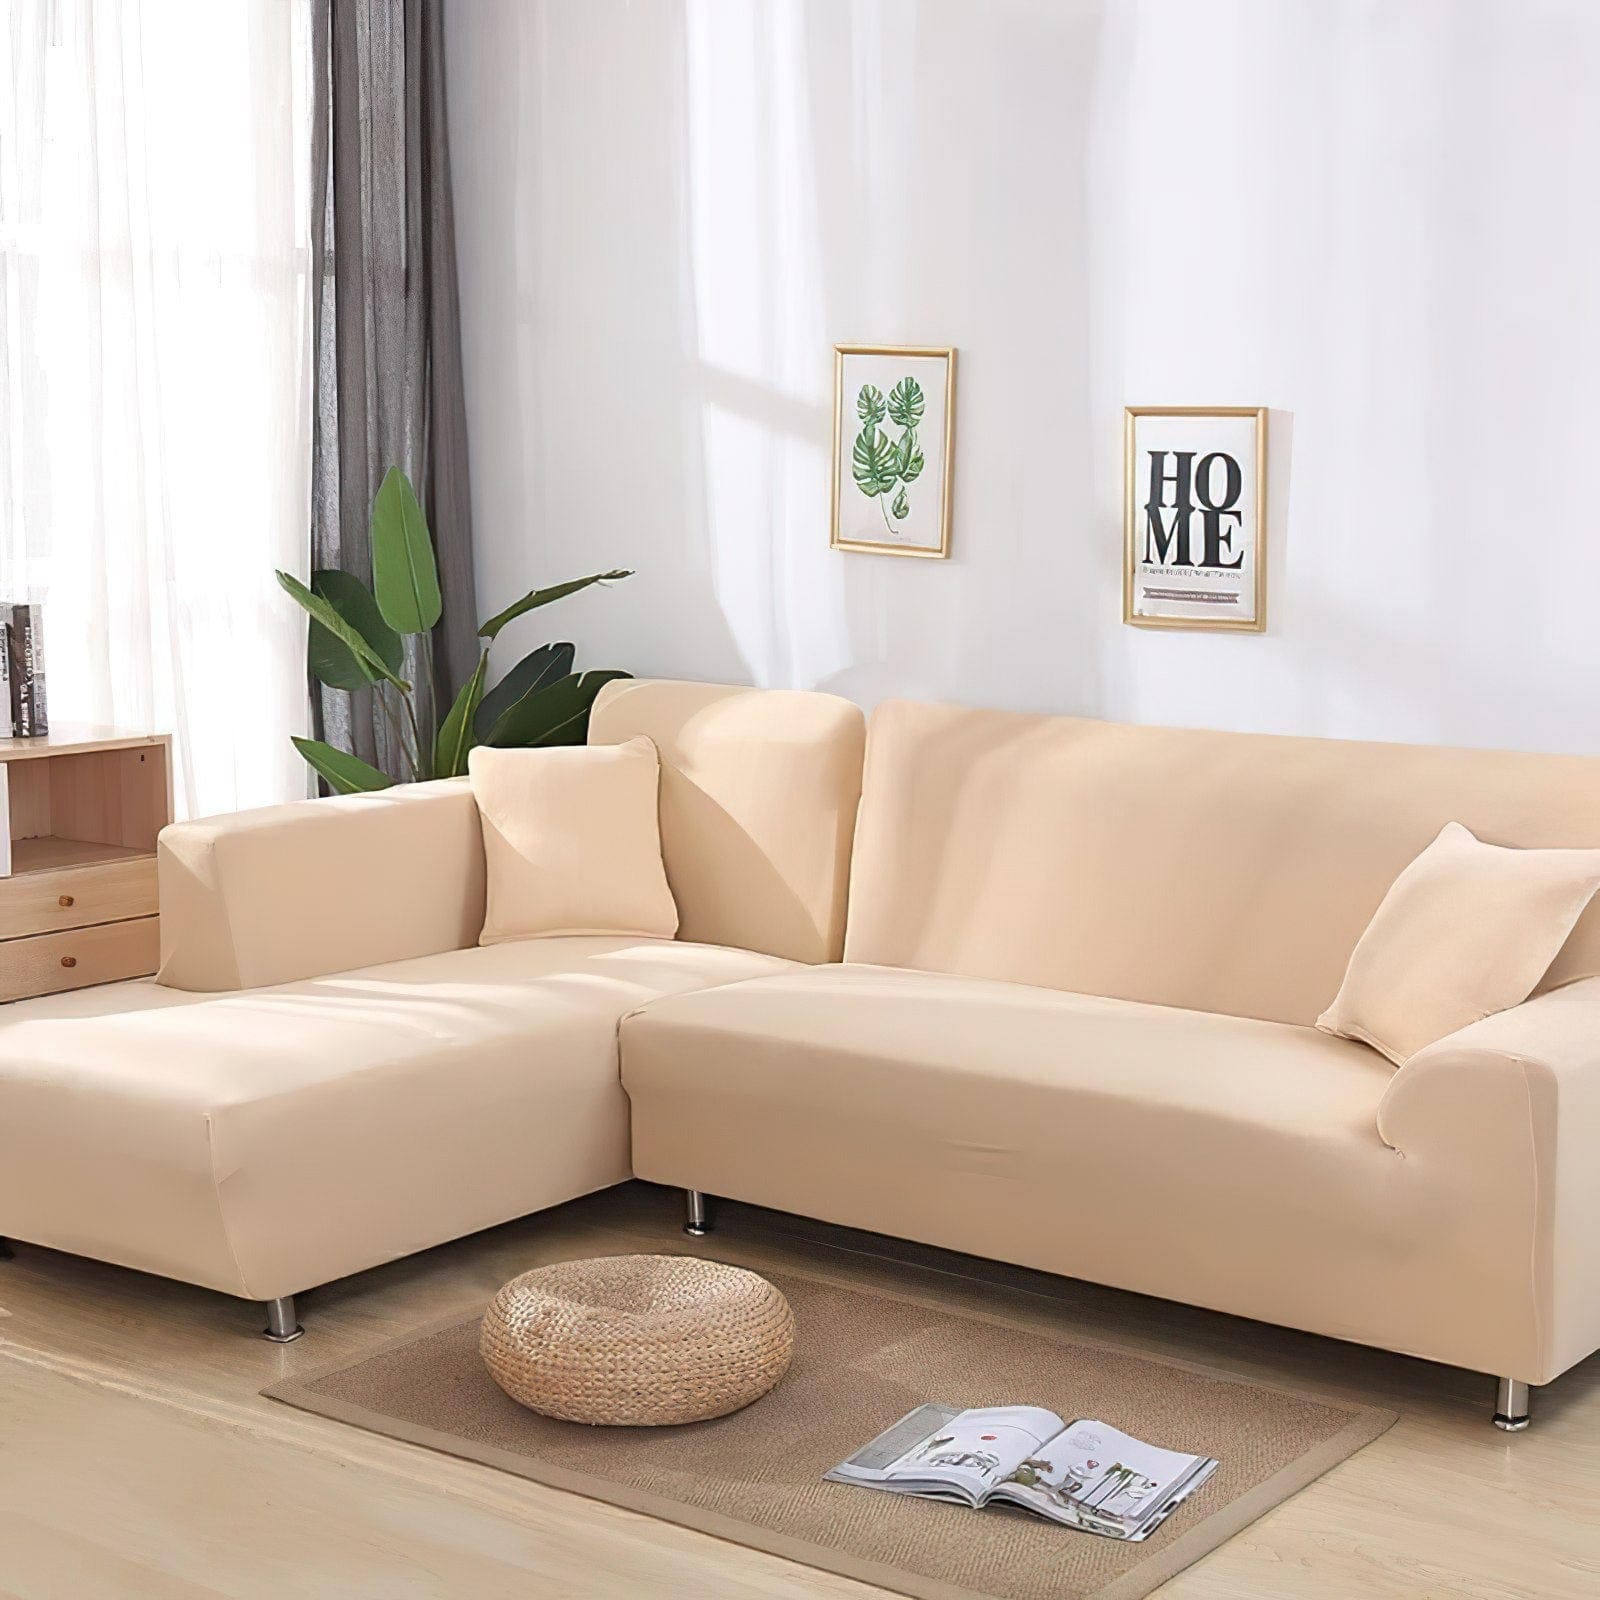 Beige - Extendable Armchair and Sofa Covers - The Sofa Cover House